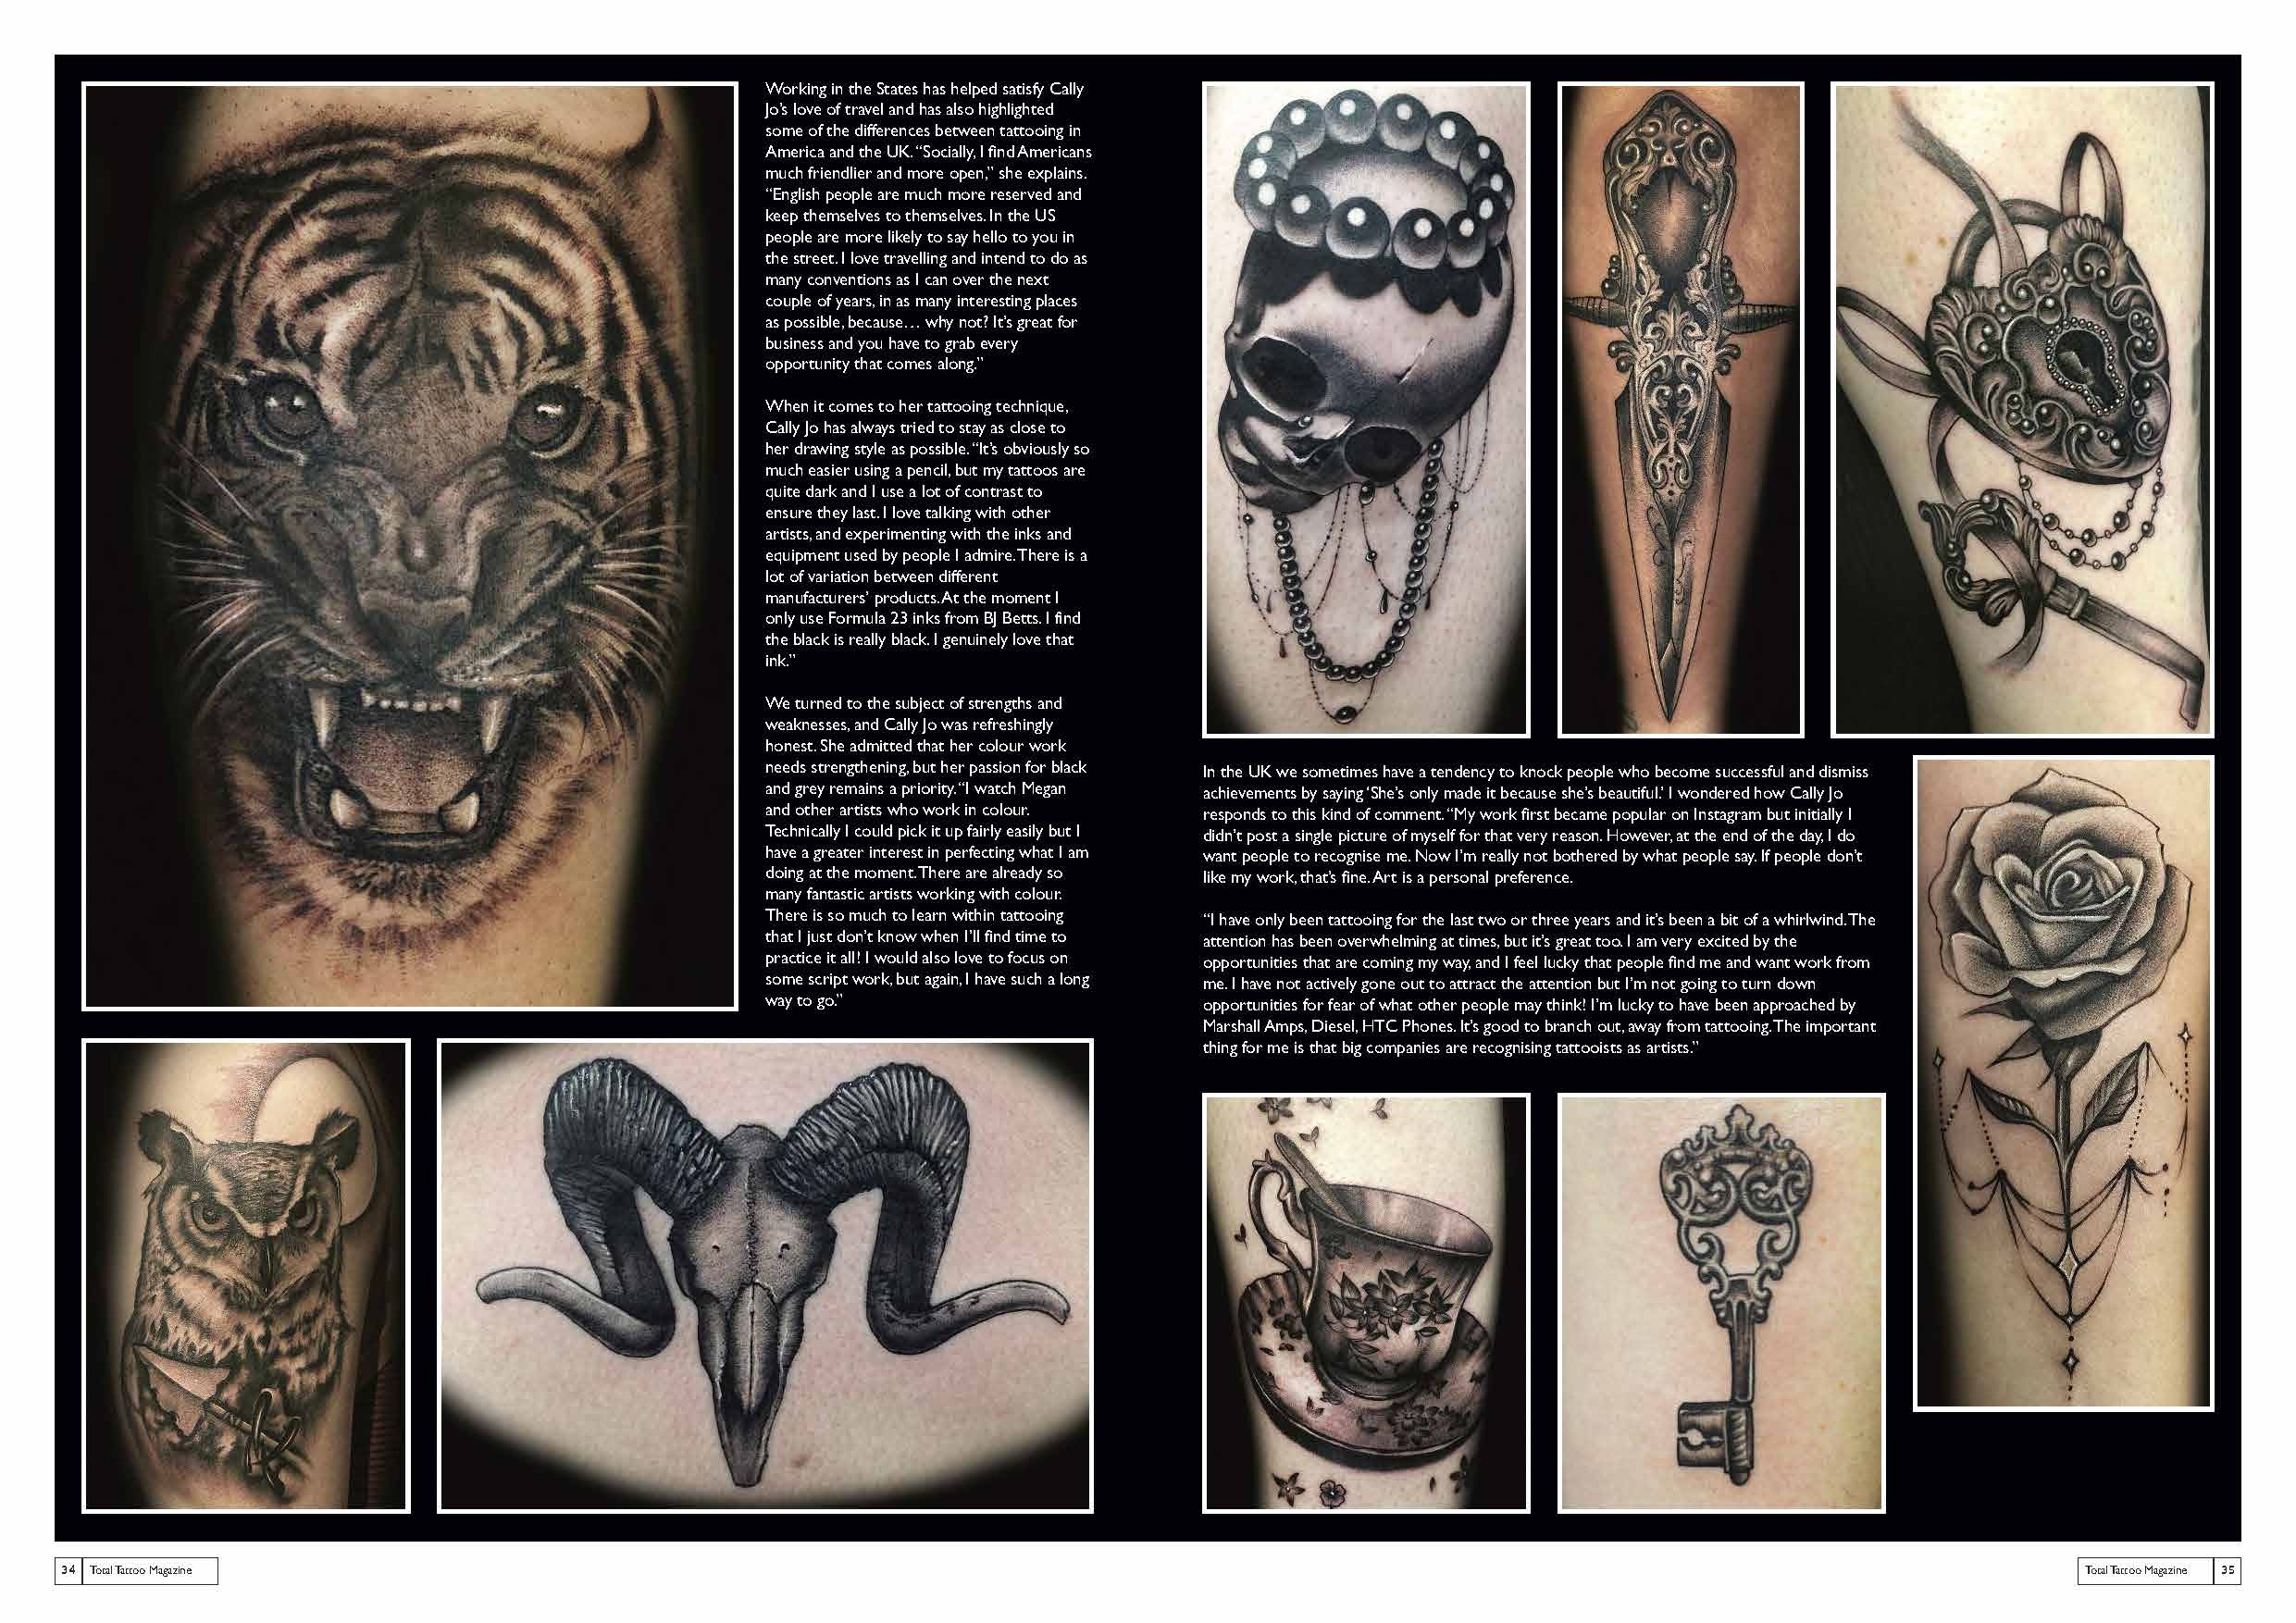 CallyJoTotalTattoo_Page_2.jpg